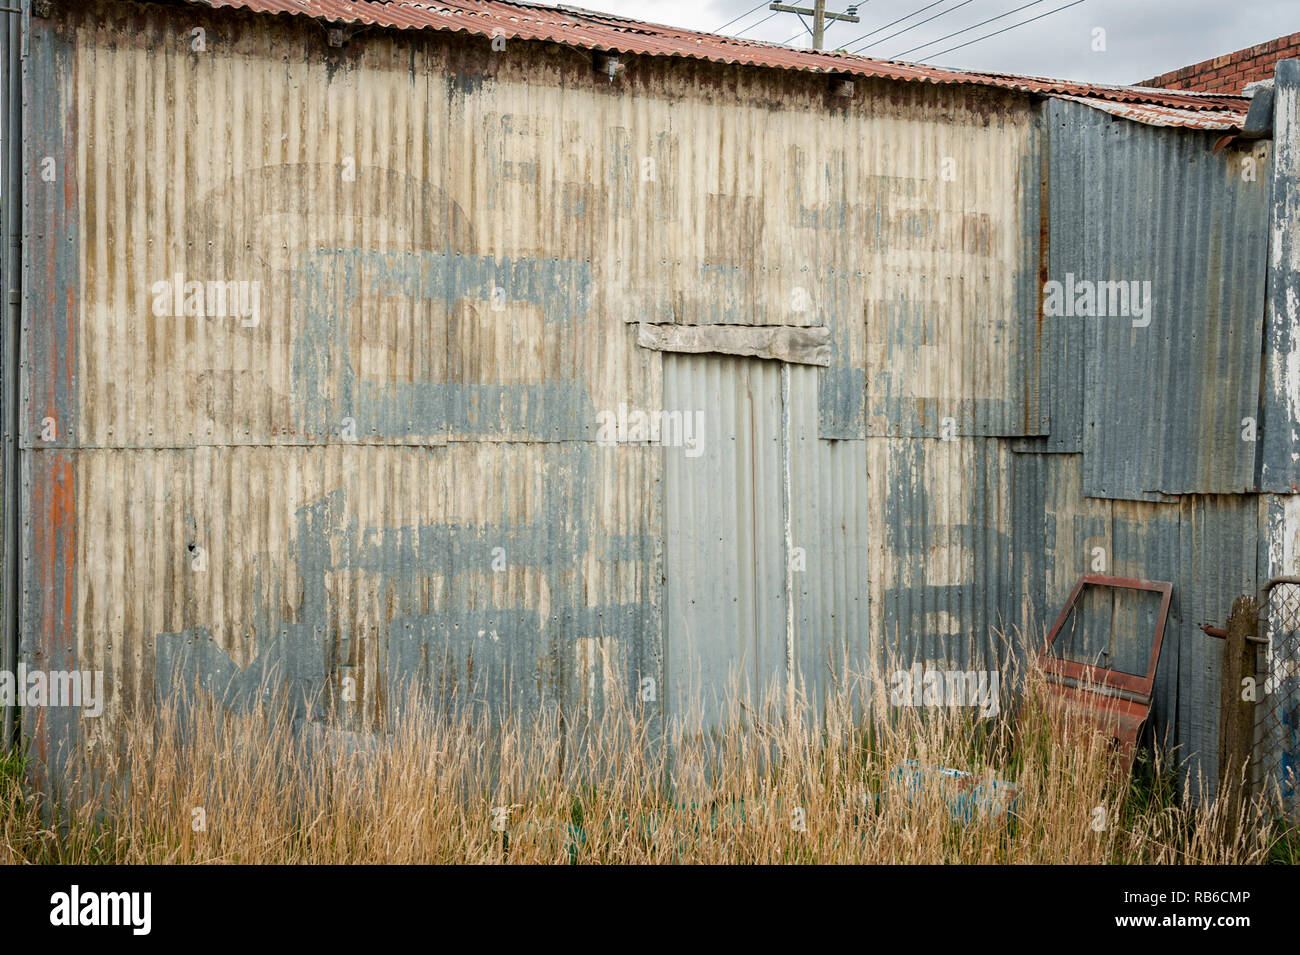 An old corrugated wall with old and weathered text with tall grass and an old car door in the foreground Stock Photo